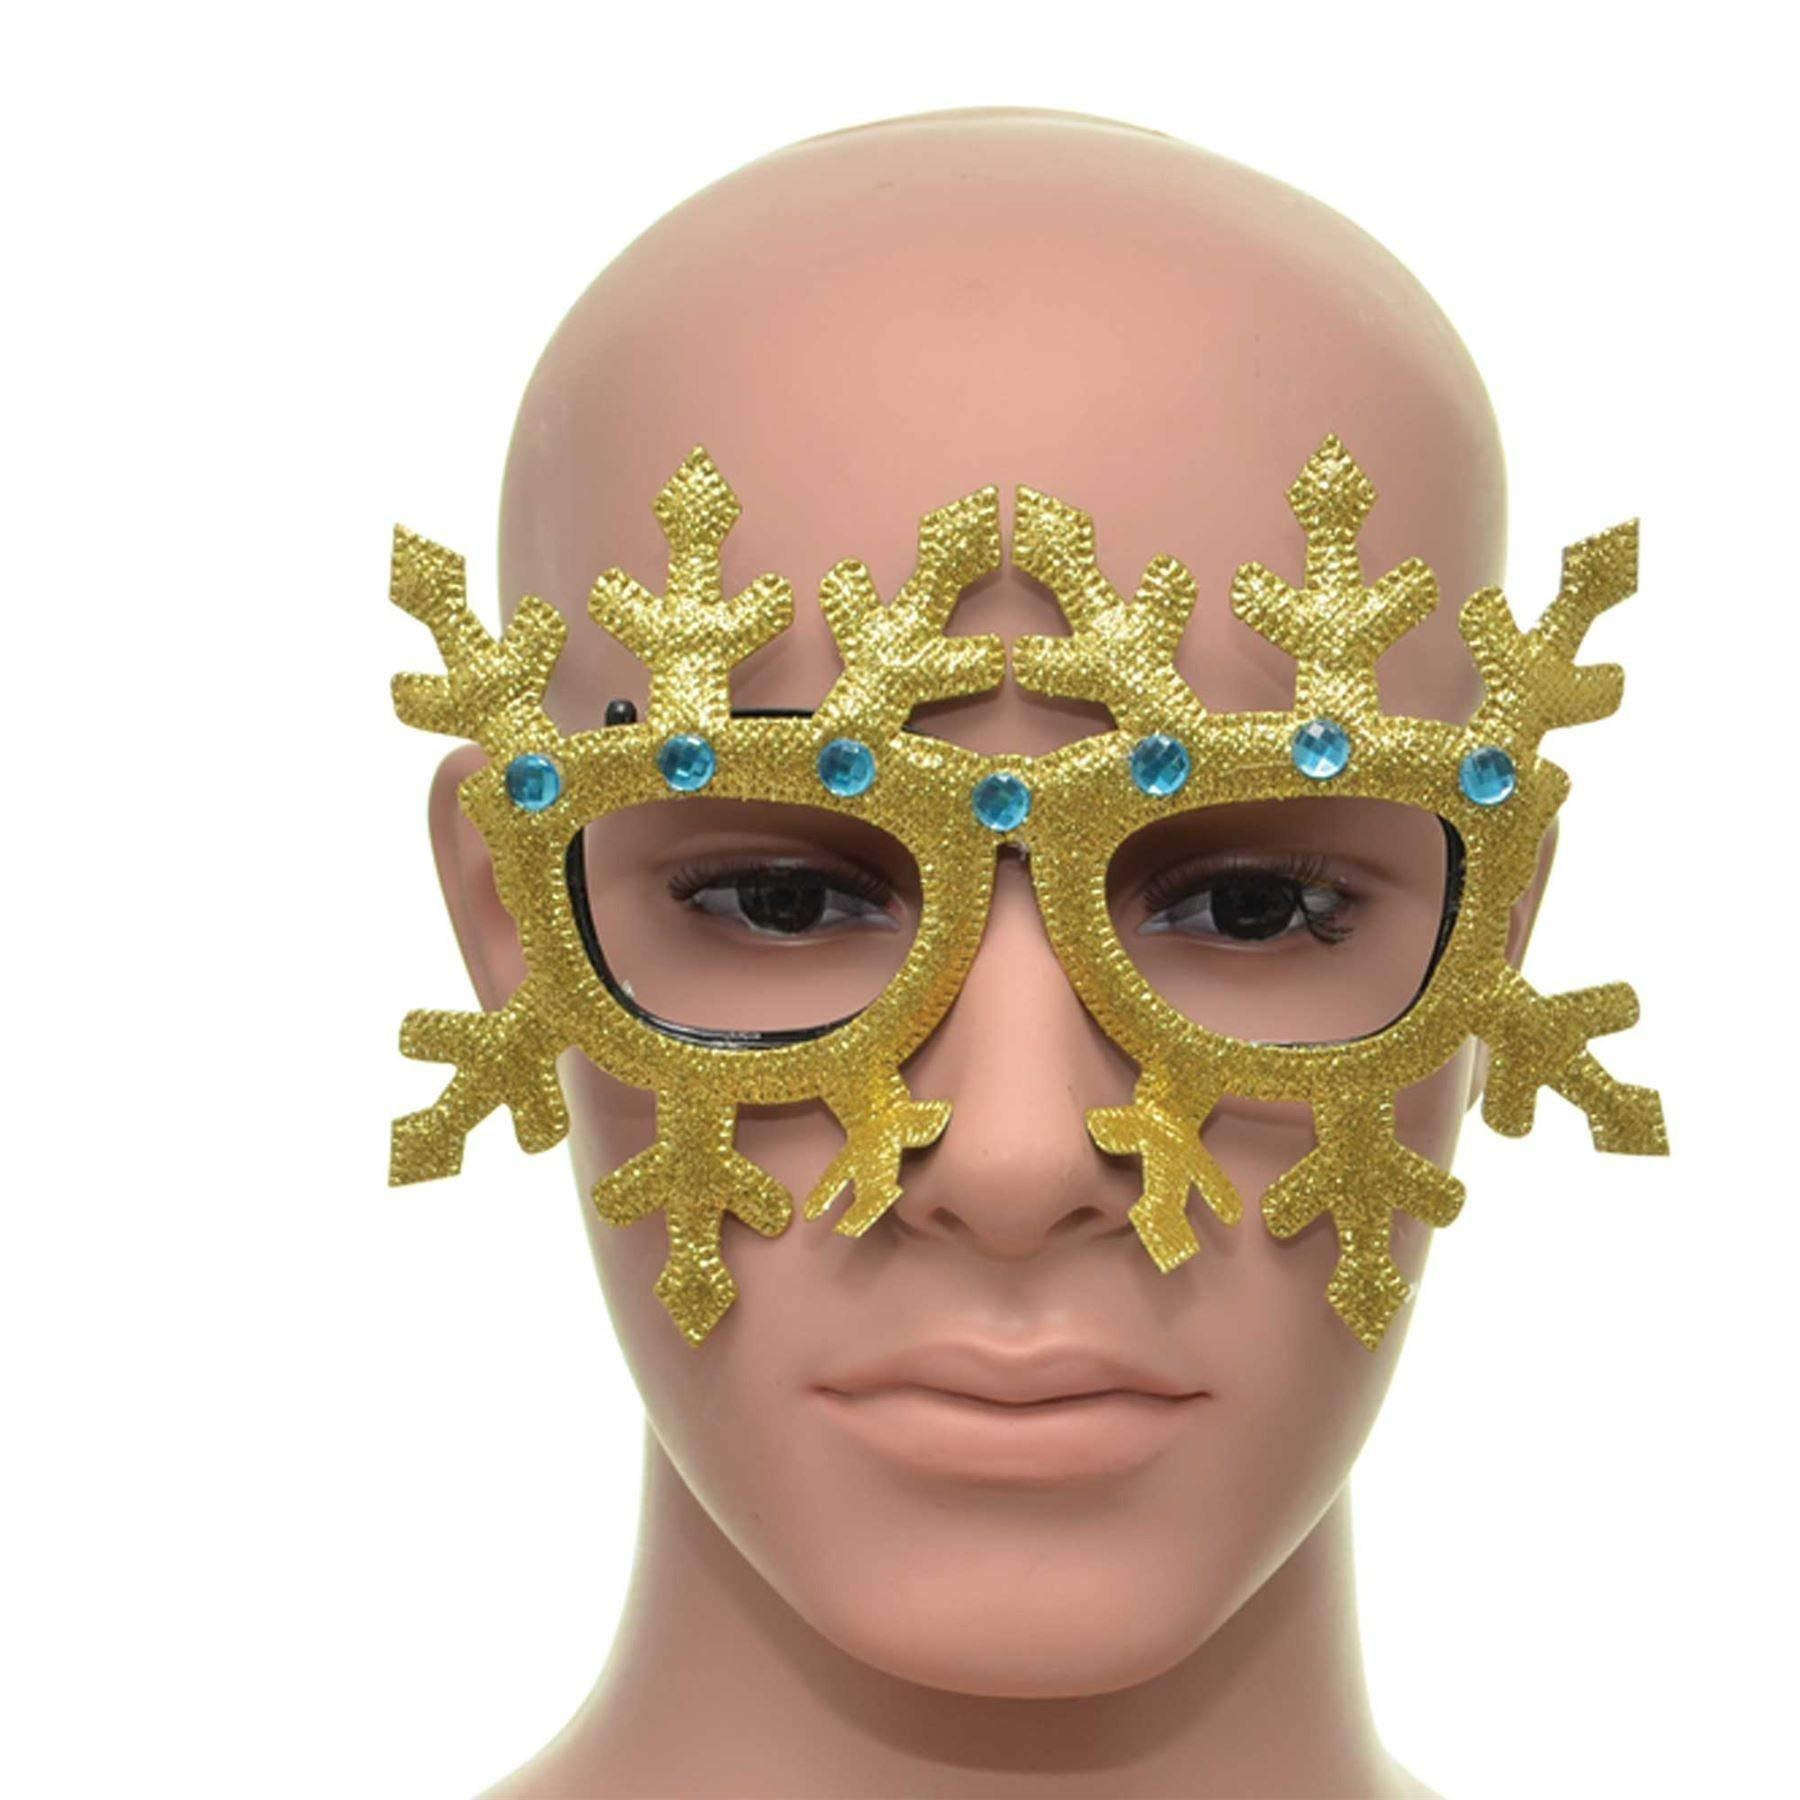 Novelty Glitter Gold Snowflake Christmas Glasses Christmas Party Props Photo Booth Accessories Stocking Fillers - image 1